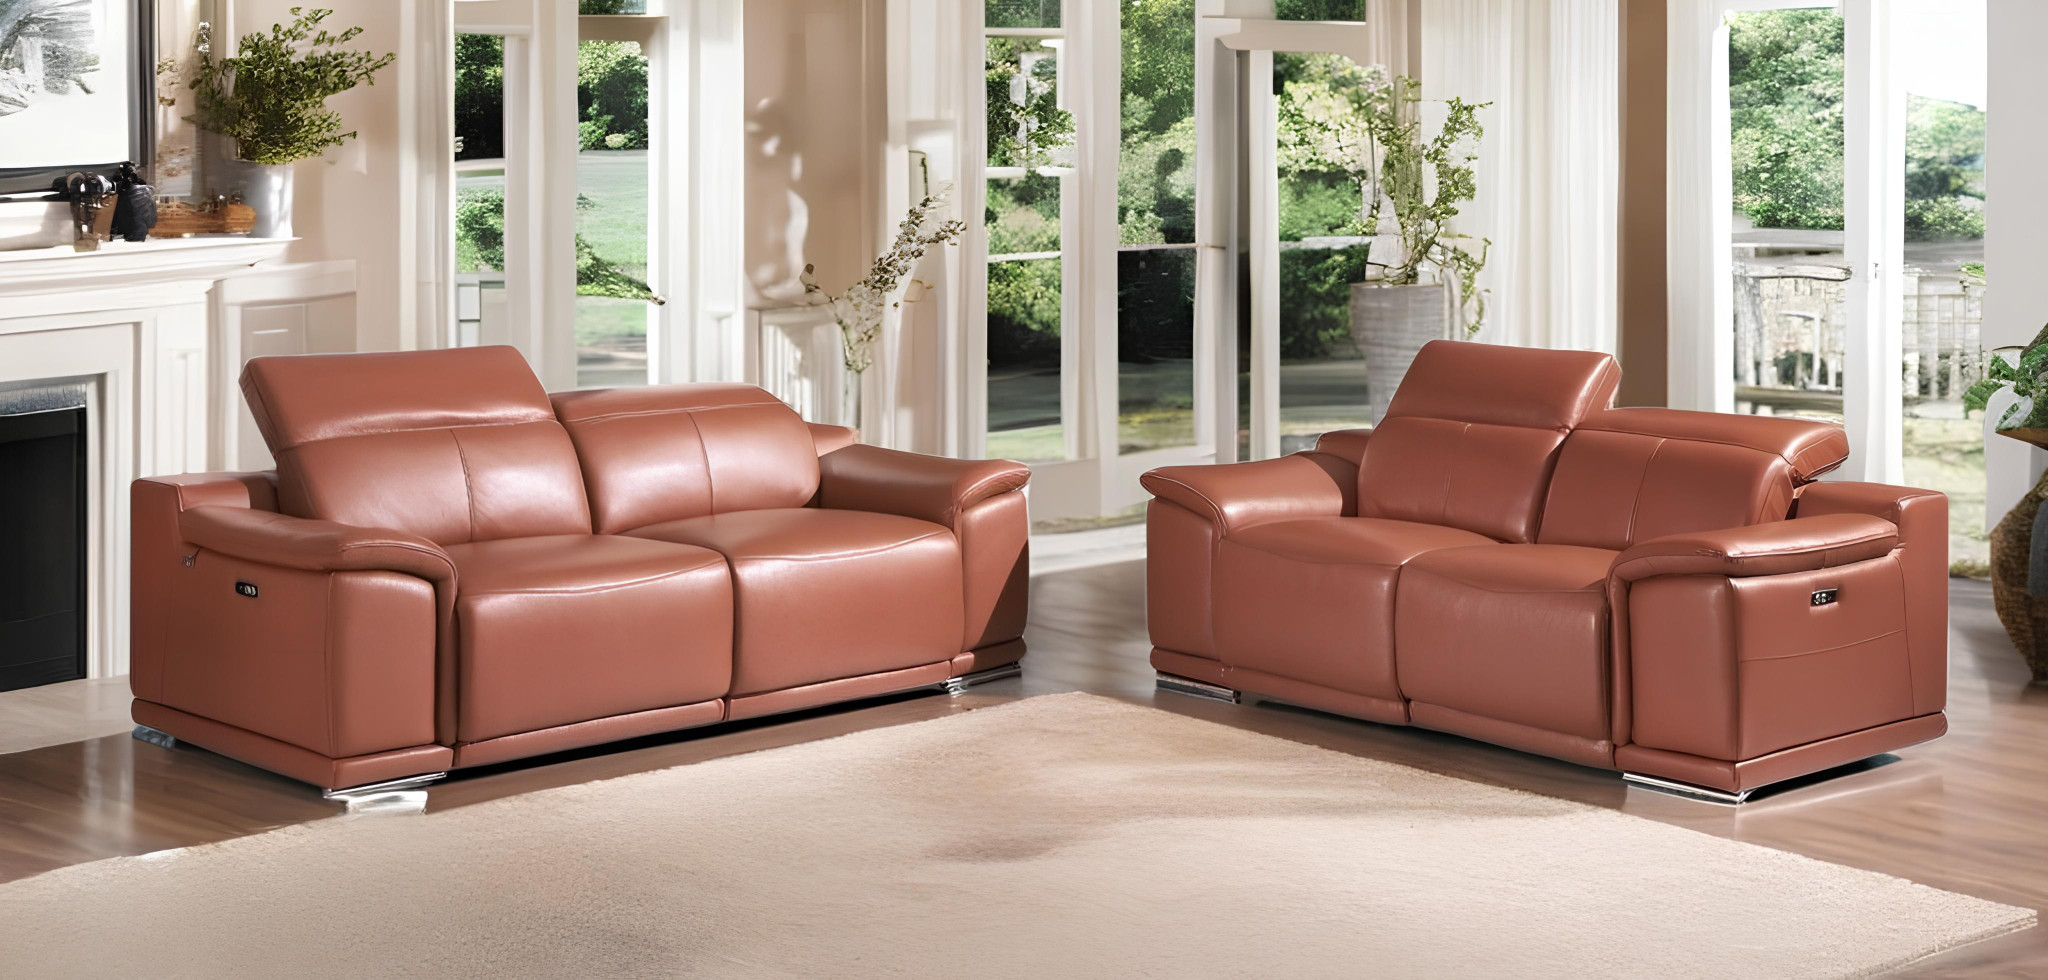 Two Piece Indoor Camel Italian Leather Five Person Seating Set-476555-1